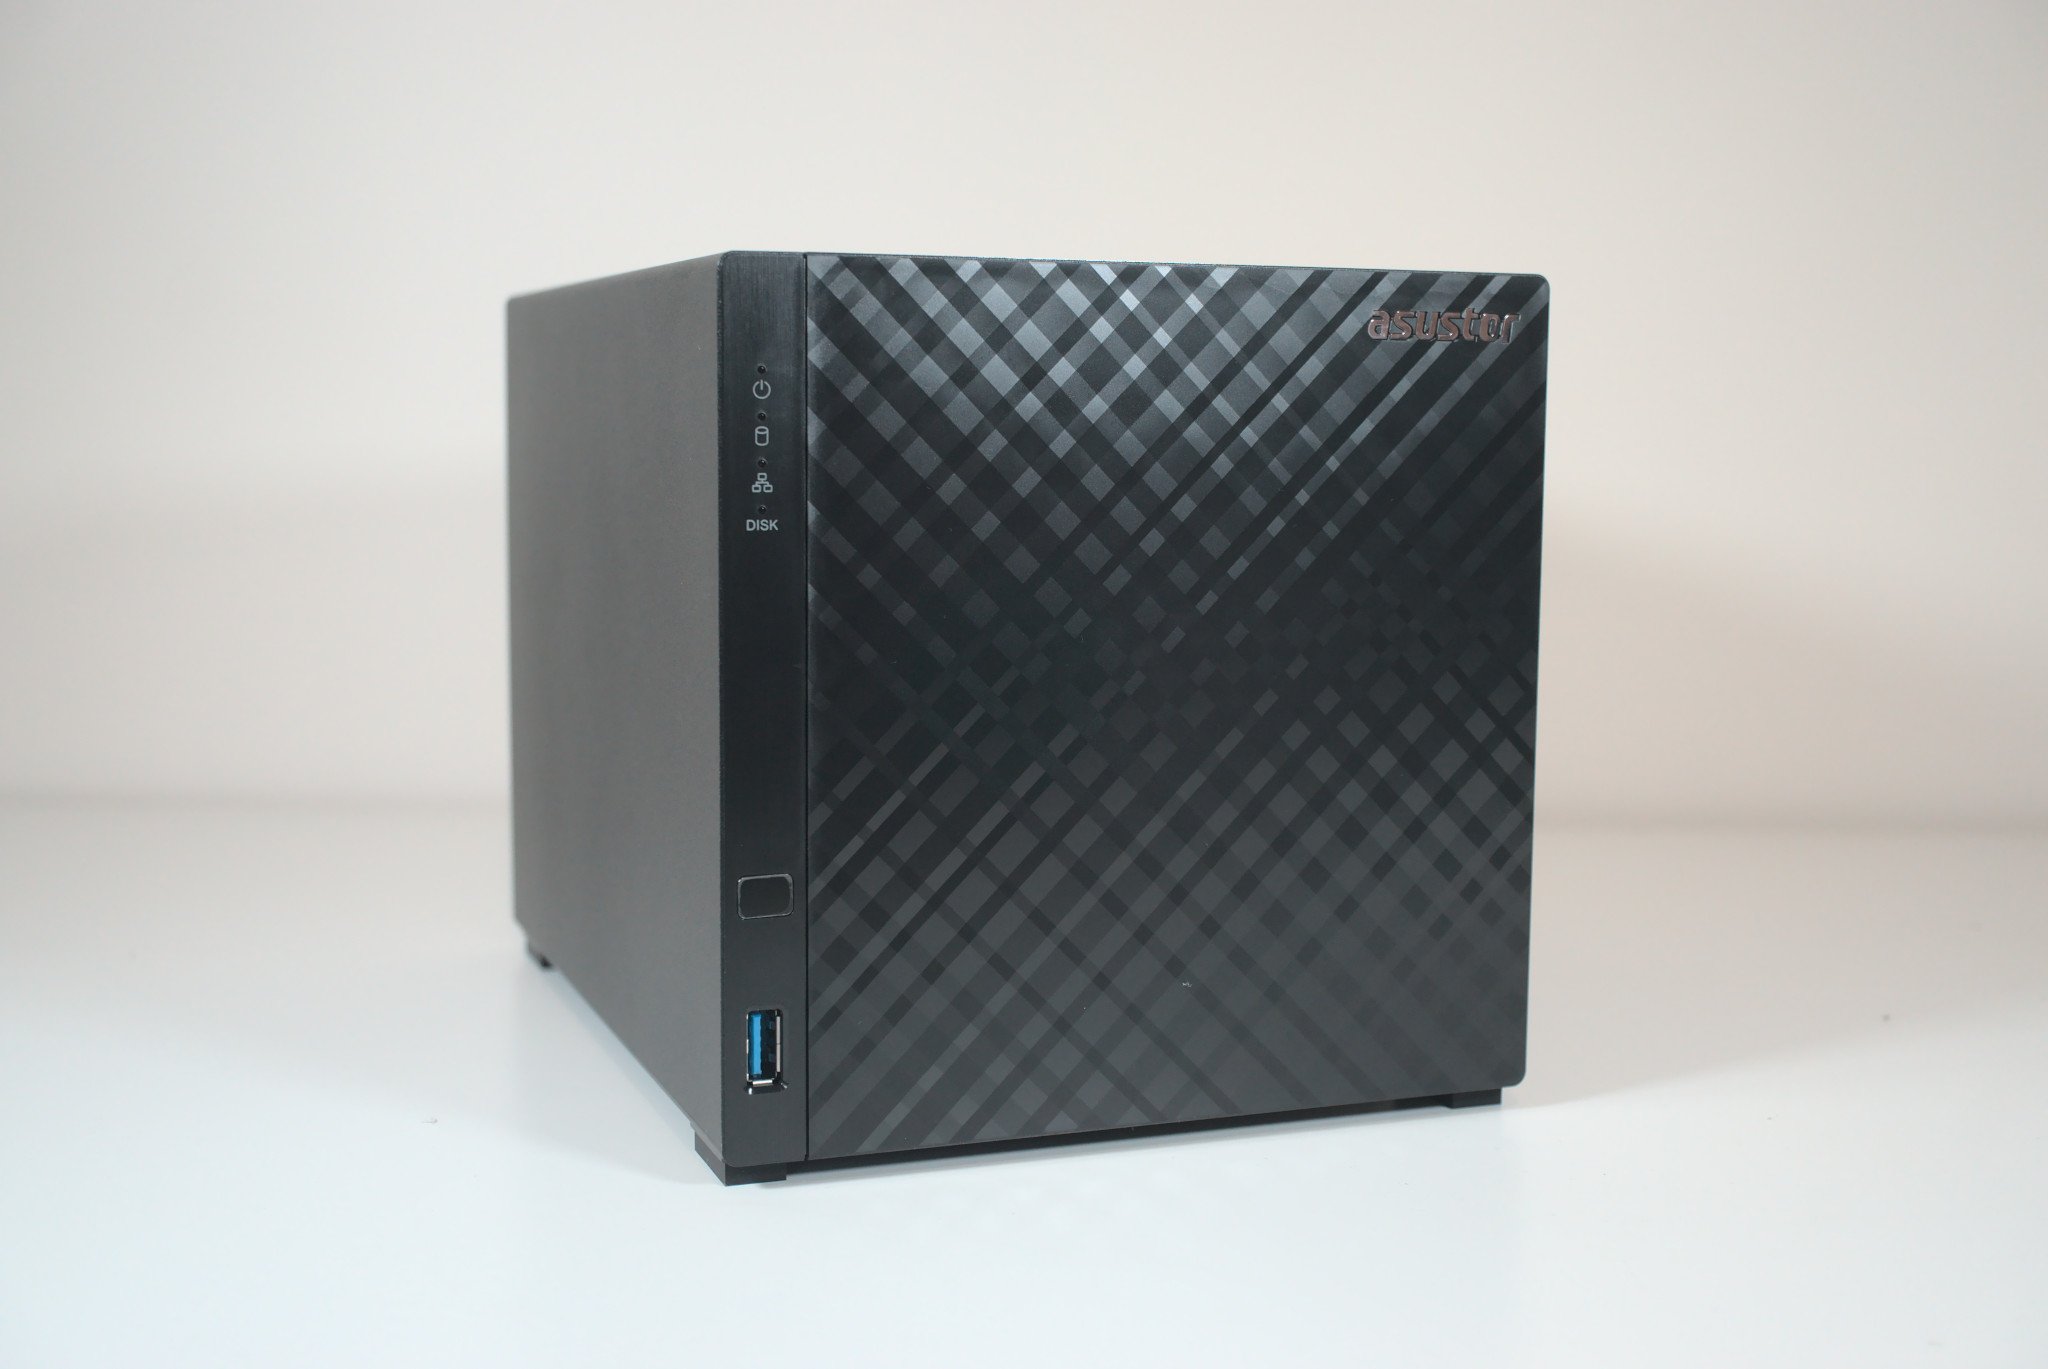 Asustor Drivestor 4 AS1104T 4-Bay NAS Review - Lots of Features for Less  than $270